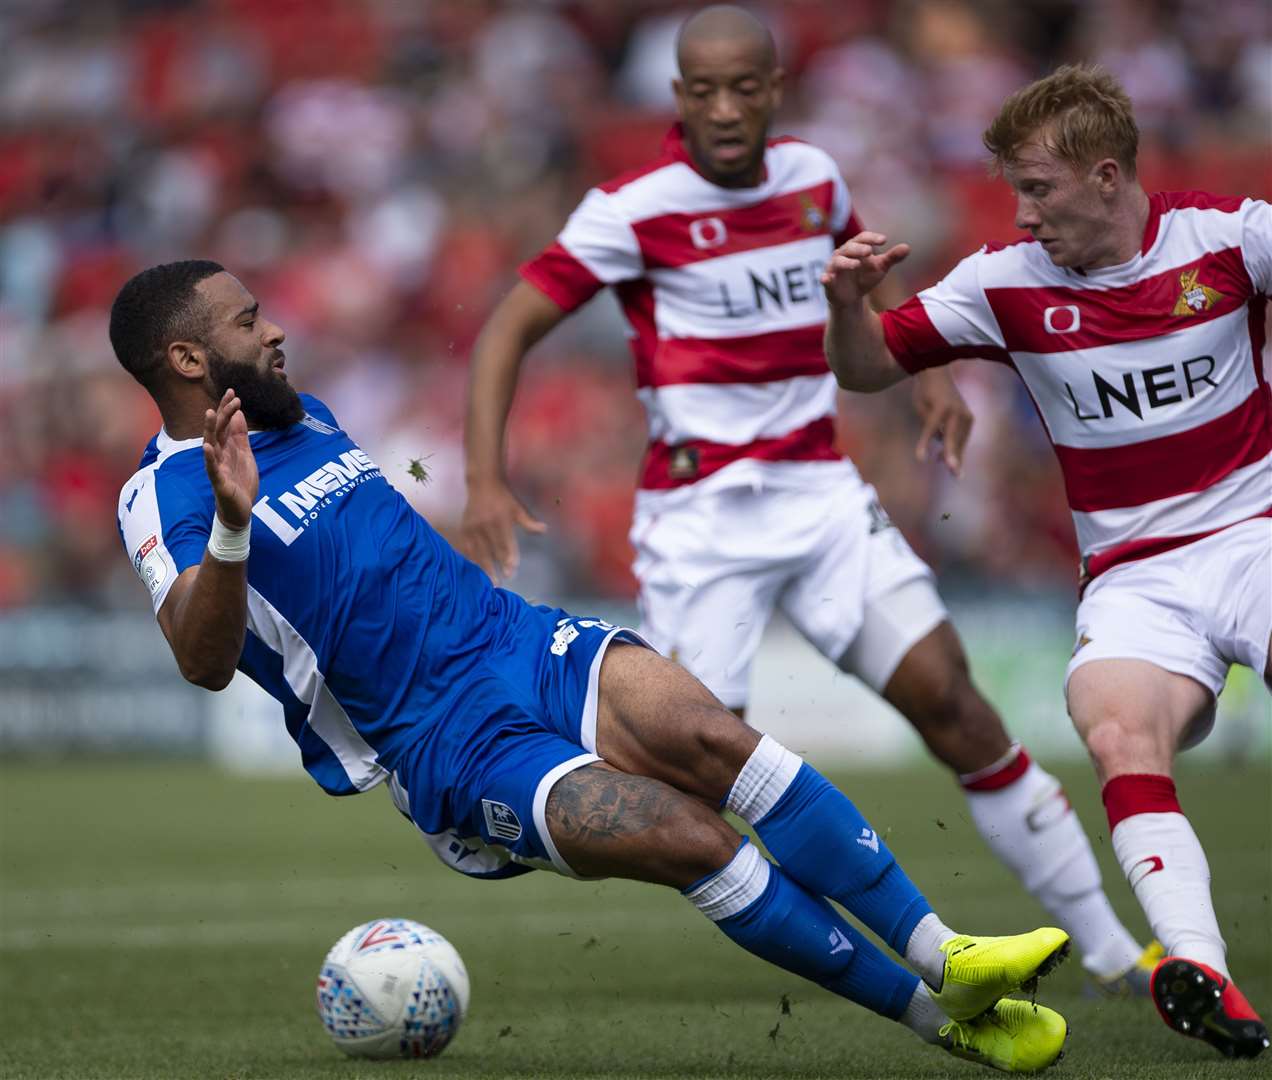 Alex Jakubiak in action on his league debut for the Gills at Doncaster